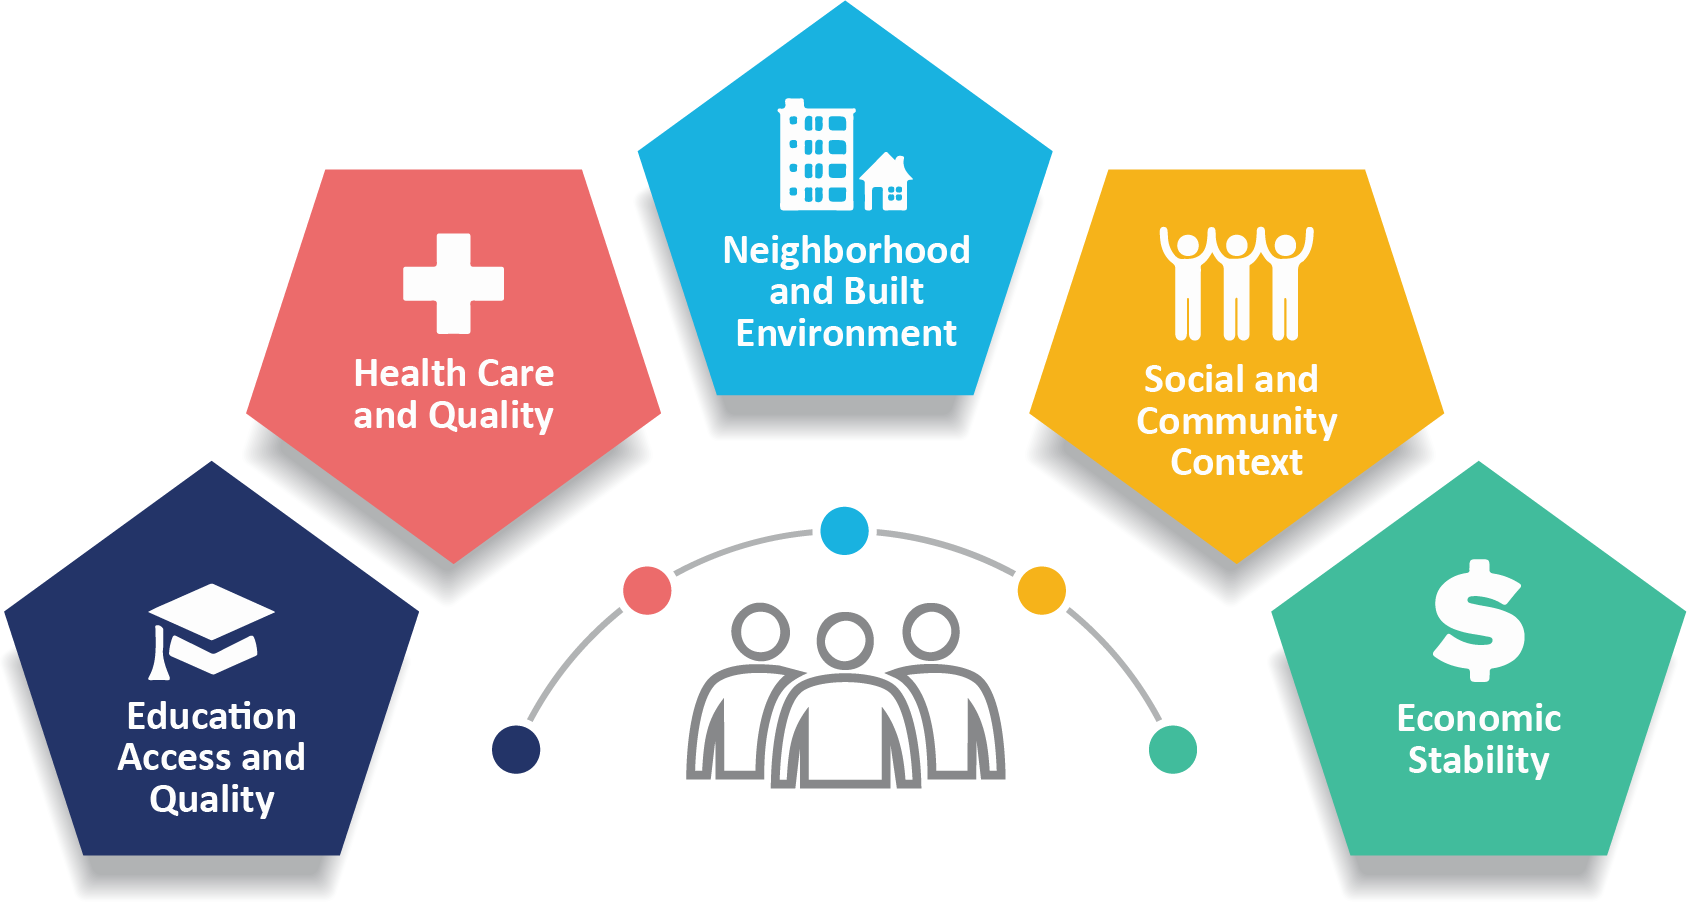 Diagram illustrating the key pillars of the Social Determinants of Health: education access and quality; health care and quality; neighborhood and built environment; social and community context; and economic stability.